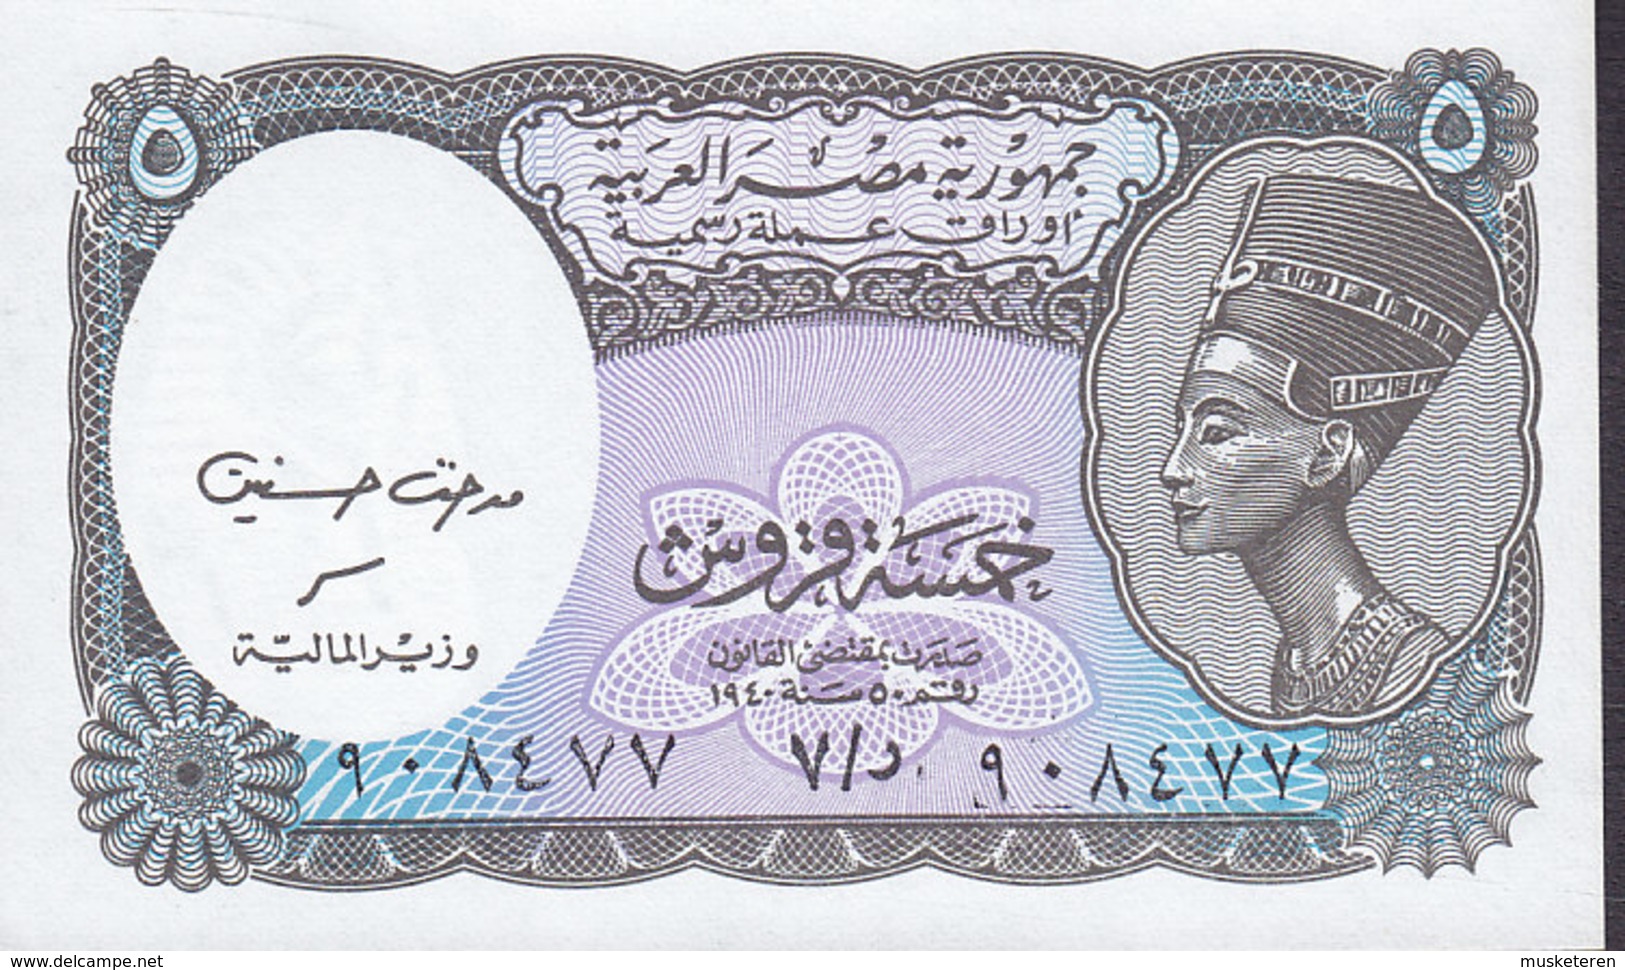 Tha Arab Republic Of Egypt - 5 Piastres Currency Note Mint Condition ** (2 Scans) - Aegypten